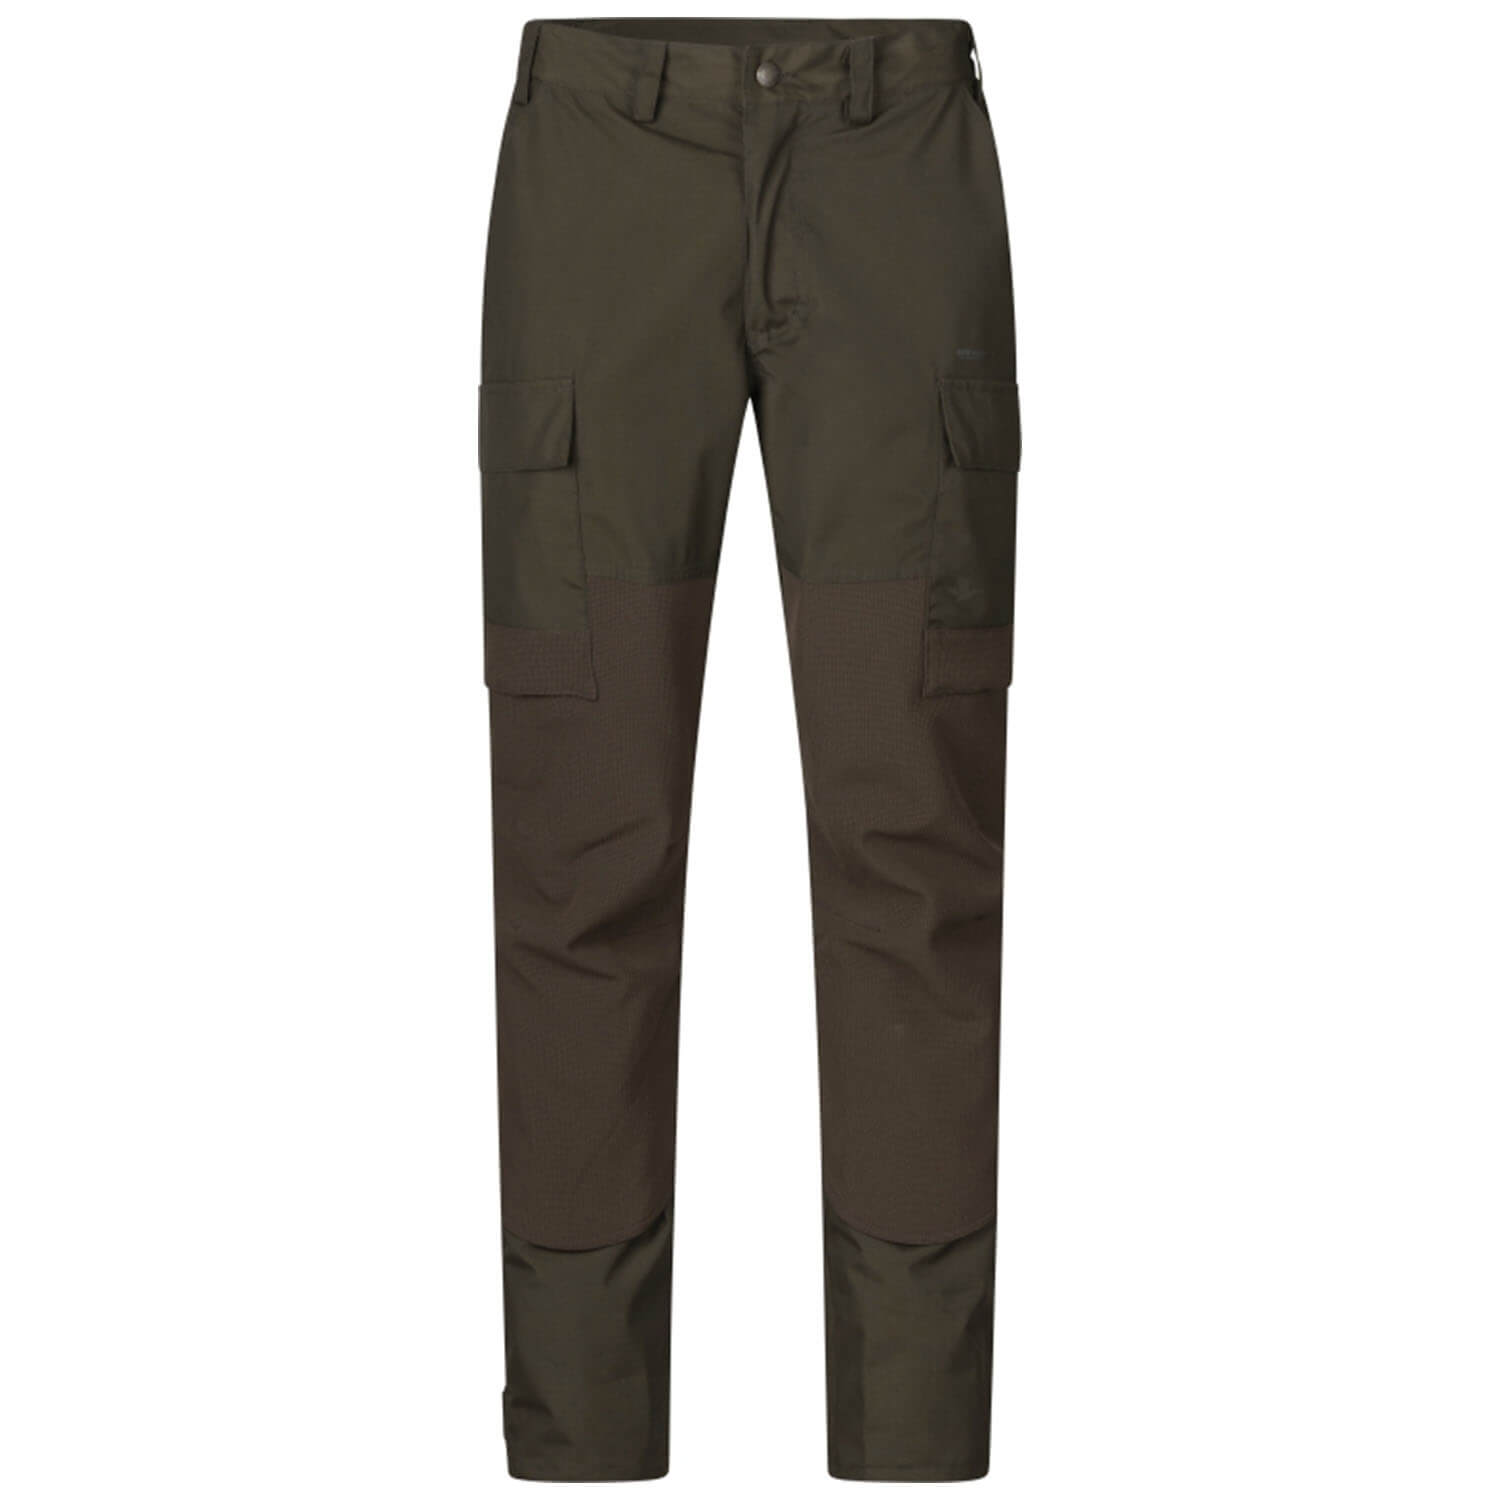 Seeland hunting pants Arden (pine green) - Hunting Clothing